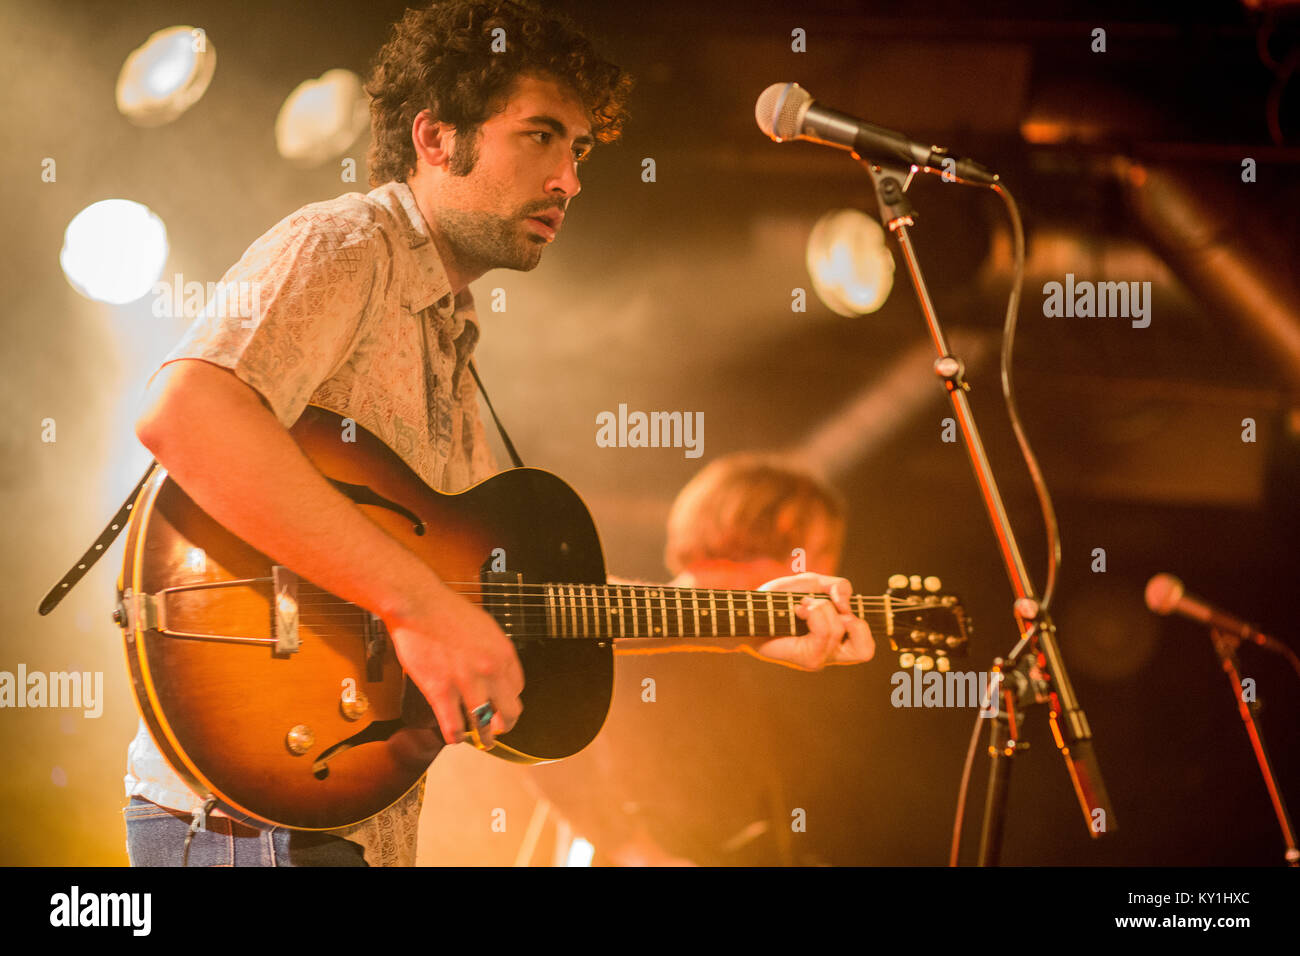 The American rock band Allah-Las performs a live concert at John Dee in  Oslo. Here the band's lead singer and guitarist Miles Michaud is pictured  live on stage. Norway, 04/06 2013 Stock